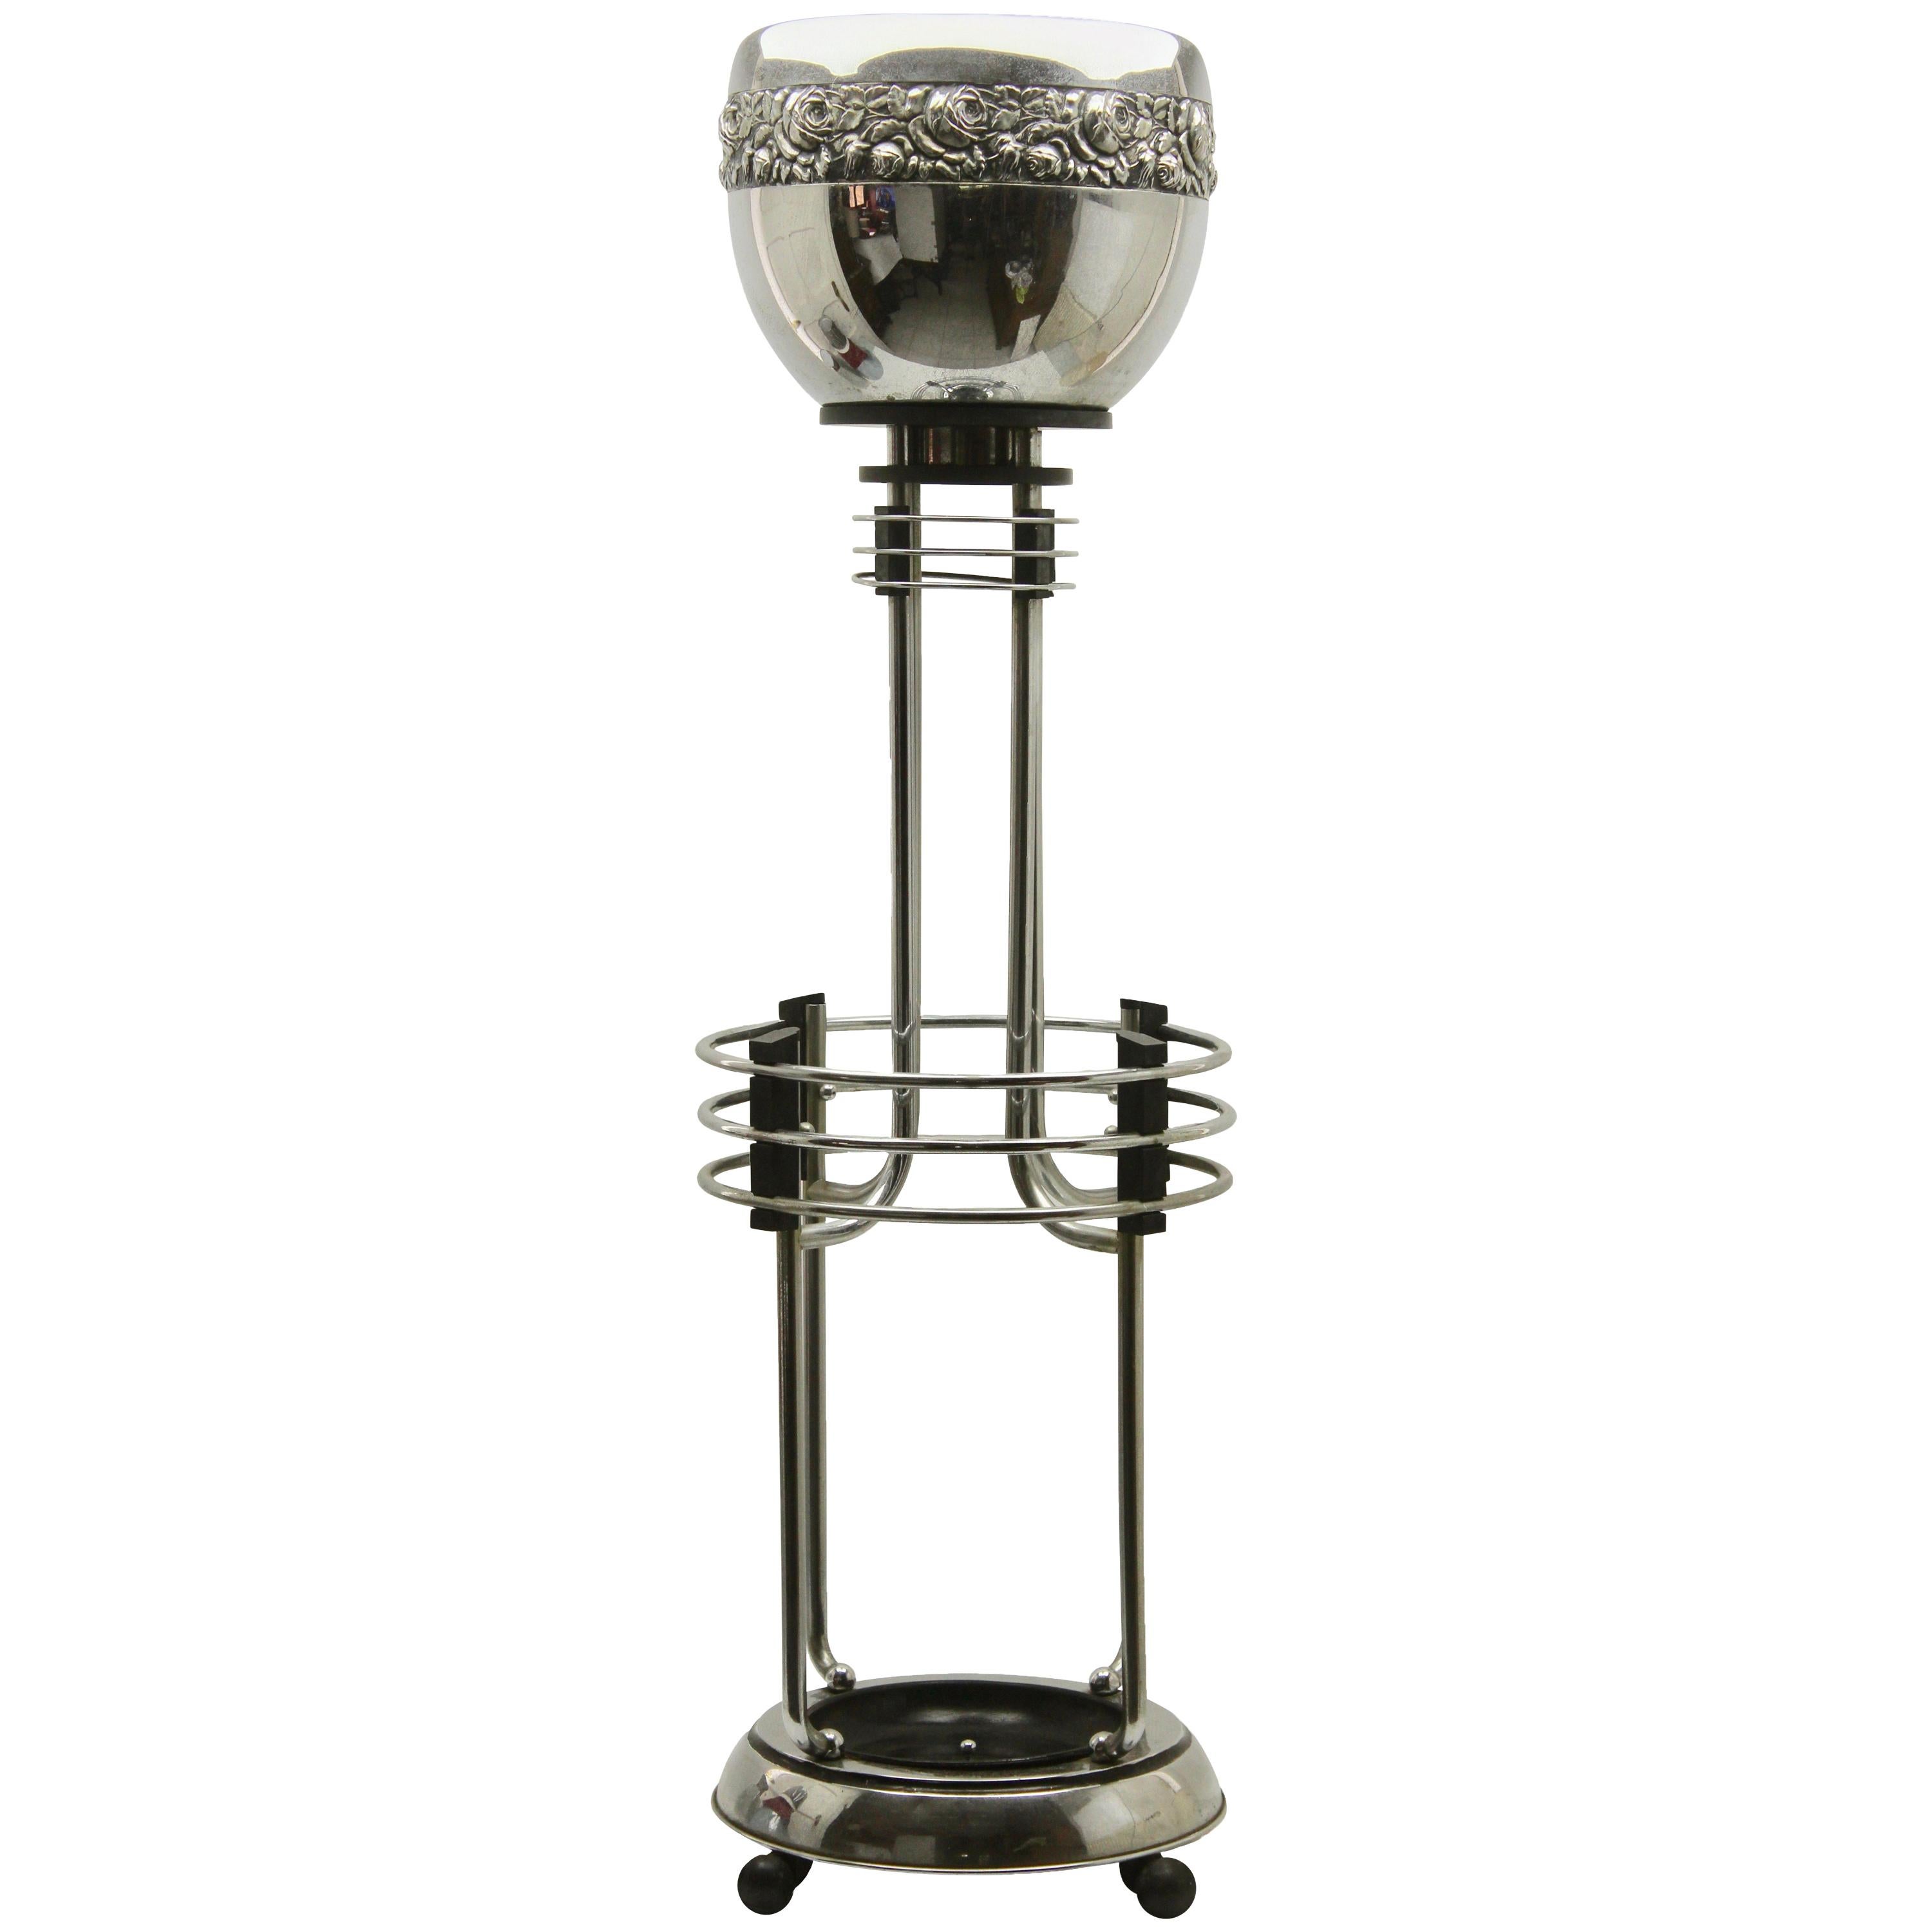 Art Deco Umbrella stand / Jardinière in Chrome and Bakelite by Demeyere, 1931